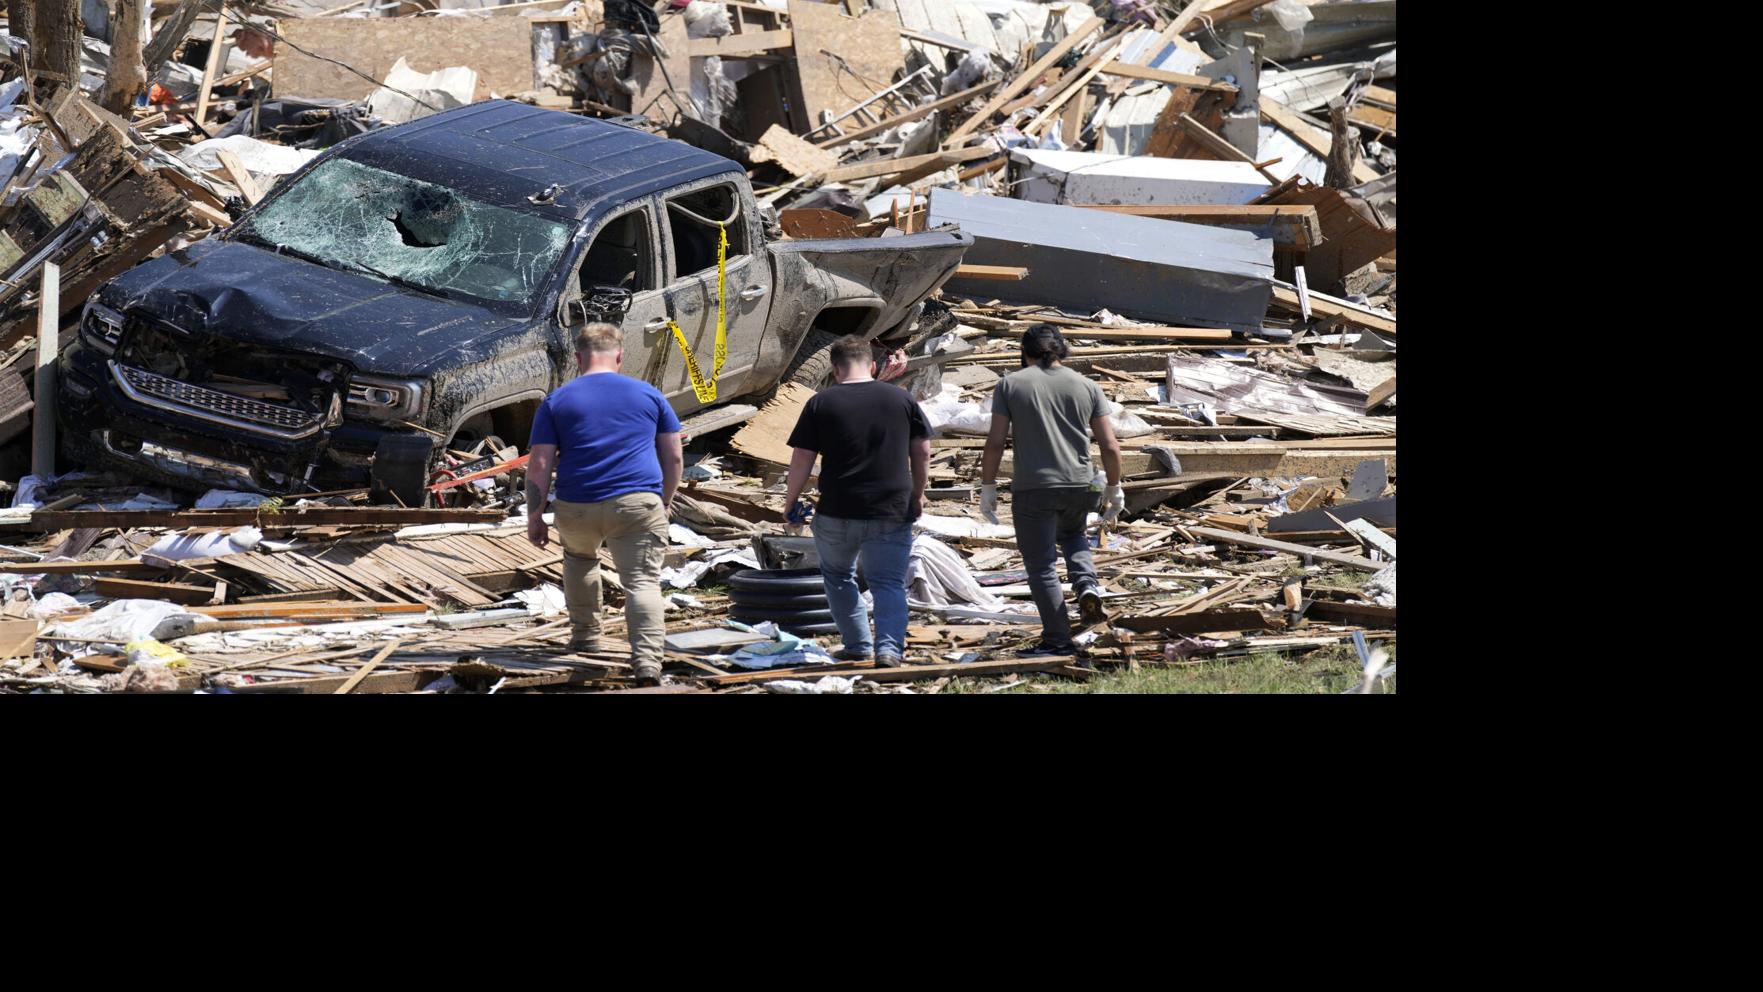 Authorities search for survivors after tornado slams Iowa